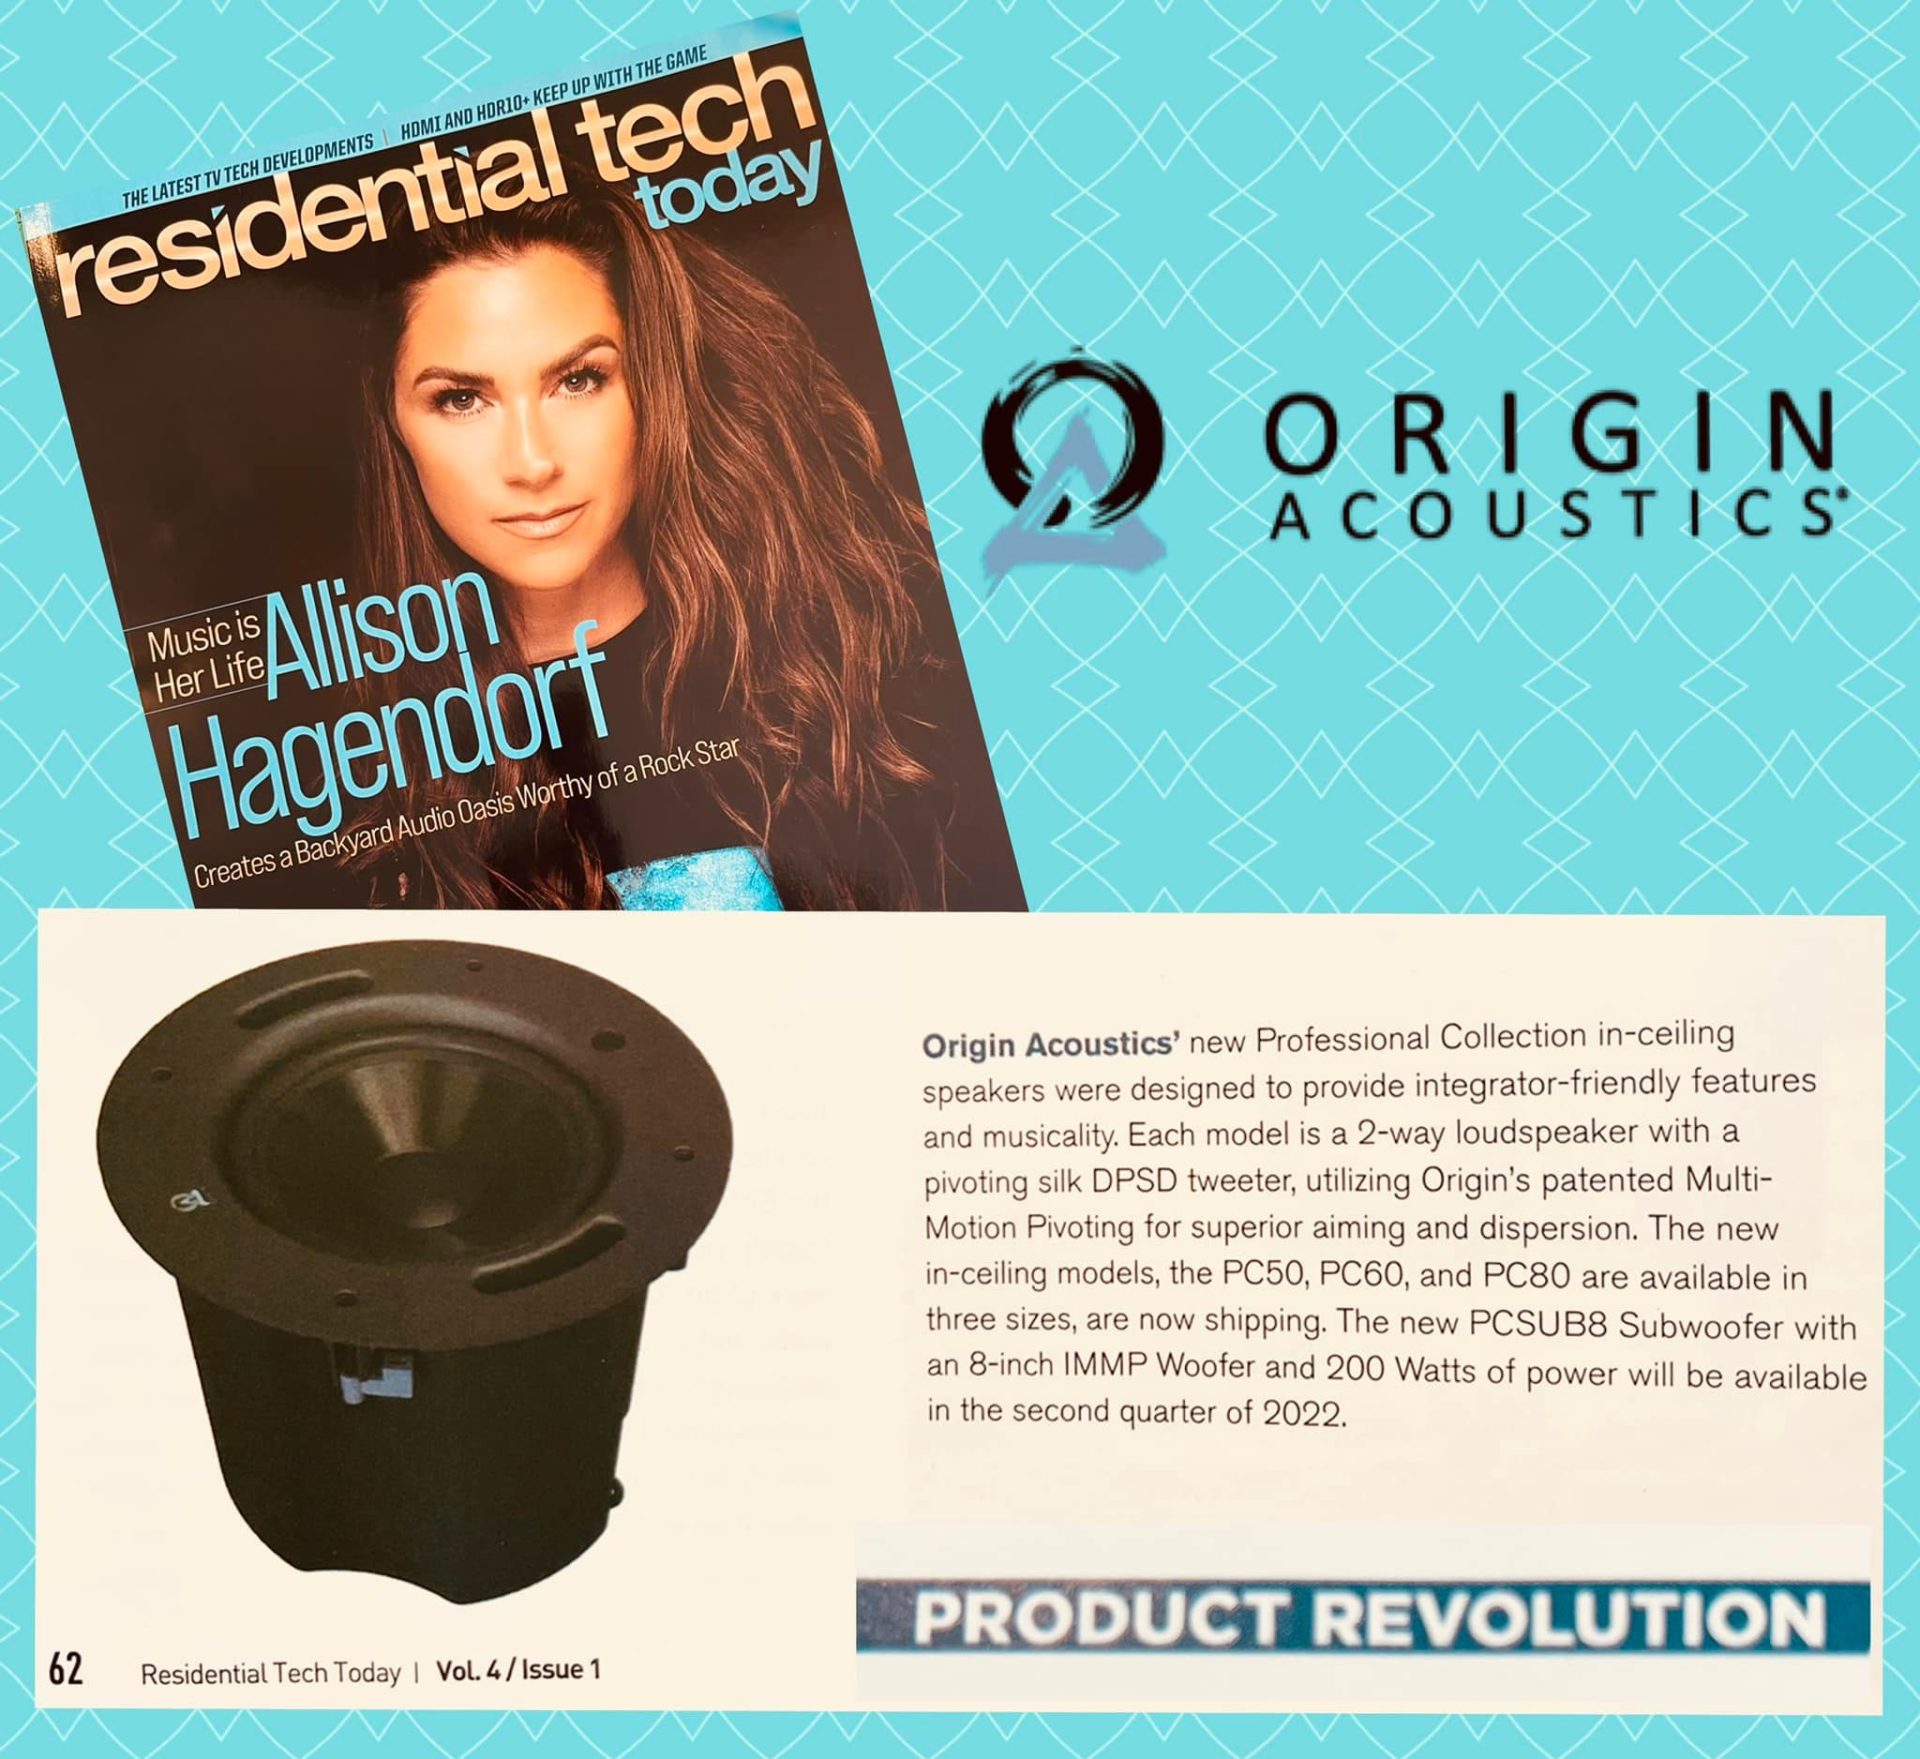 Residential Tech Today, May Issue – Product Revolution, Origin Acoustics Professional Collection In-Ceiling Speakers